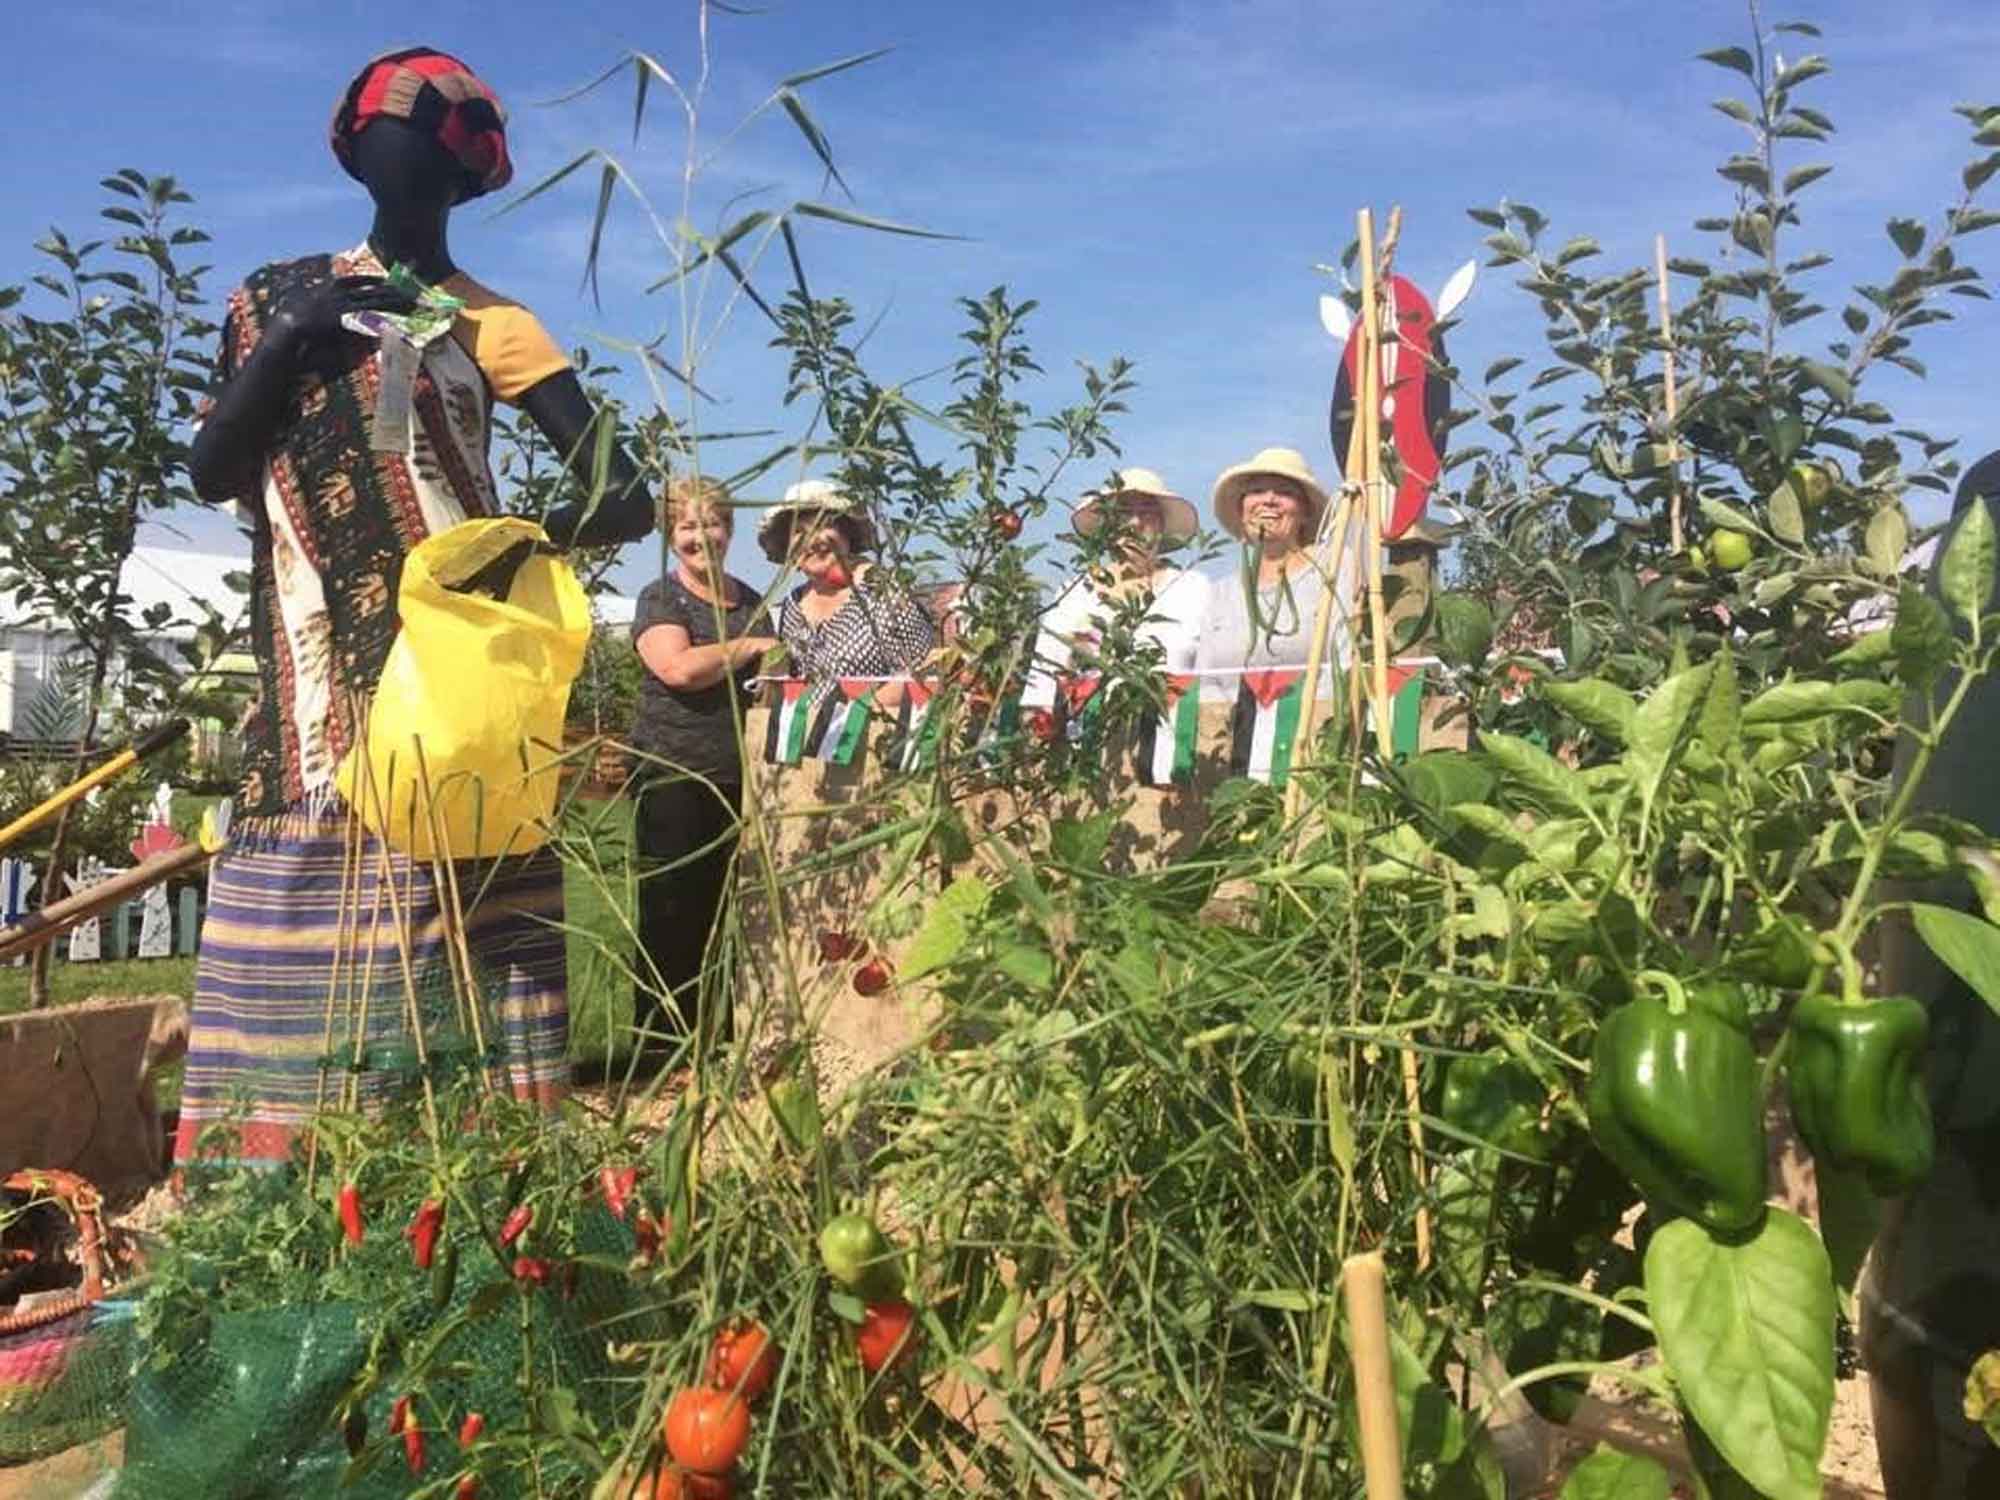 The local Harrogate and District Soroptimist Club was inspired to create their Kenyan ‘Meru Garden for Life’ at this year’s Autumn Flower Show